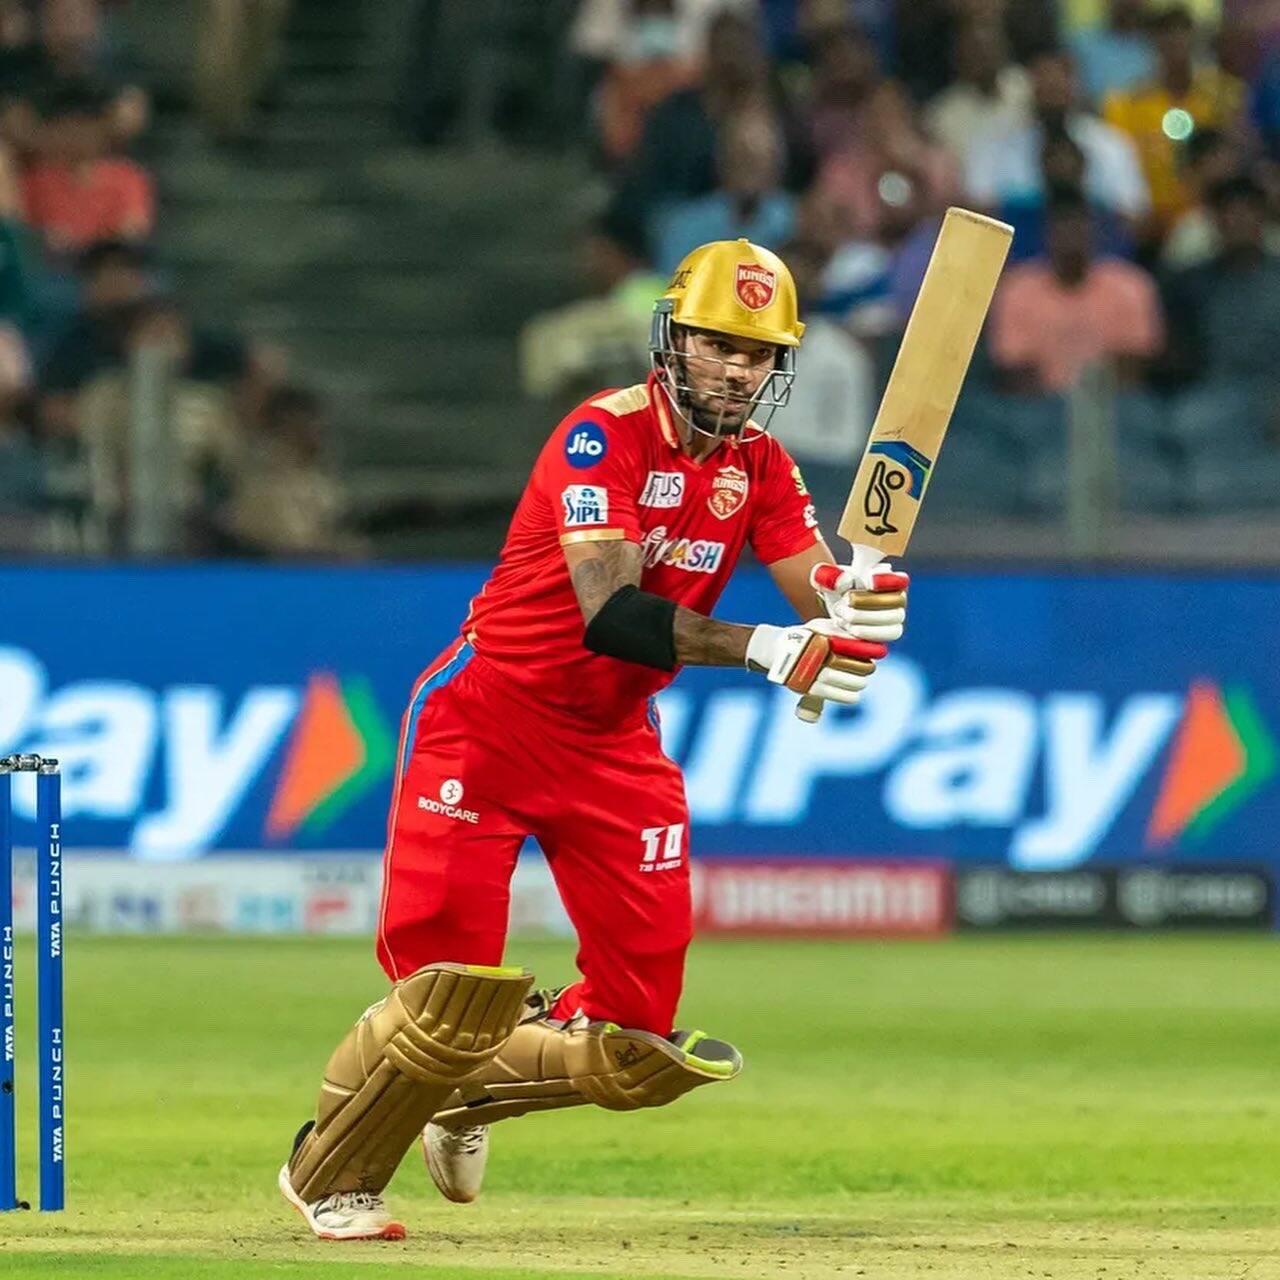 The veteran left-handed batter started his IPL career with the Mumbai Indians is currently second on the list with 5989 runs. Shikhar Dhawan is currently playing for the Punjab Kings and has played for five different franchises in the cast-rich league - Mumbai Indians (2009-2010), Deccan Chargers (2011-2012), Sunrisers Hyderabad (2013-2018), Delhi Capitals (2019-2021) and Punjab Kings (2022). (Source: Twitter)